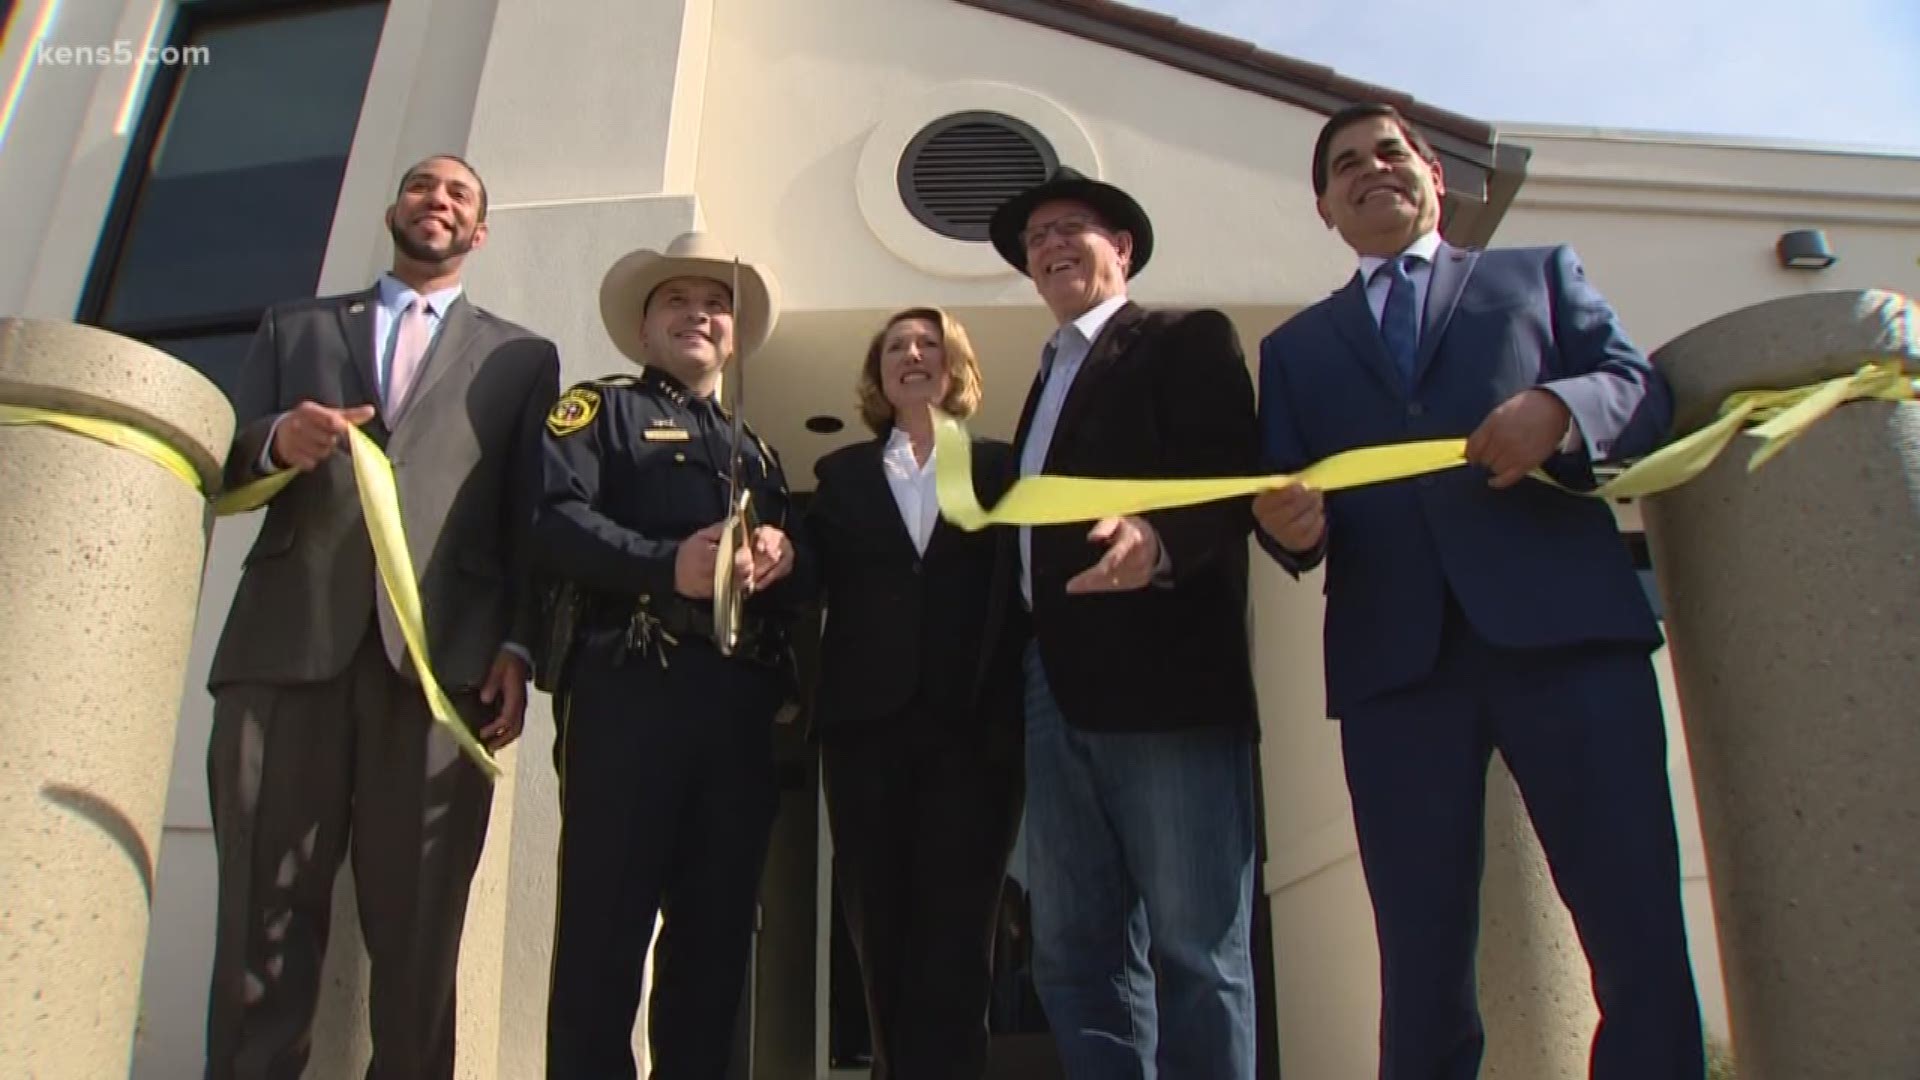 Seven years after he was fatally shot while on patrol, a BCSO sergeant is being memorialized with the office's first permanent substation. It opened on Saturday morning.